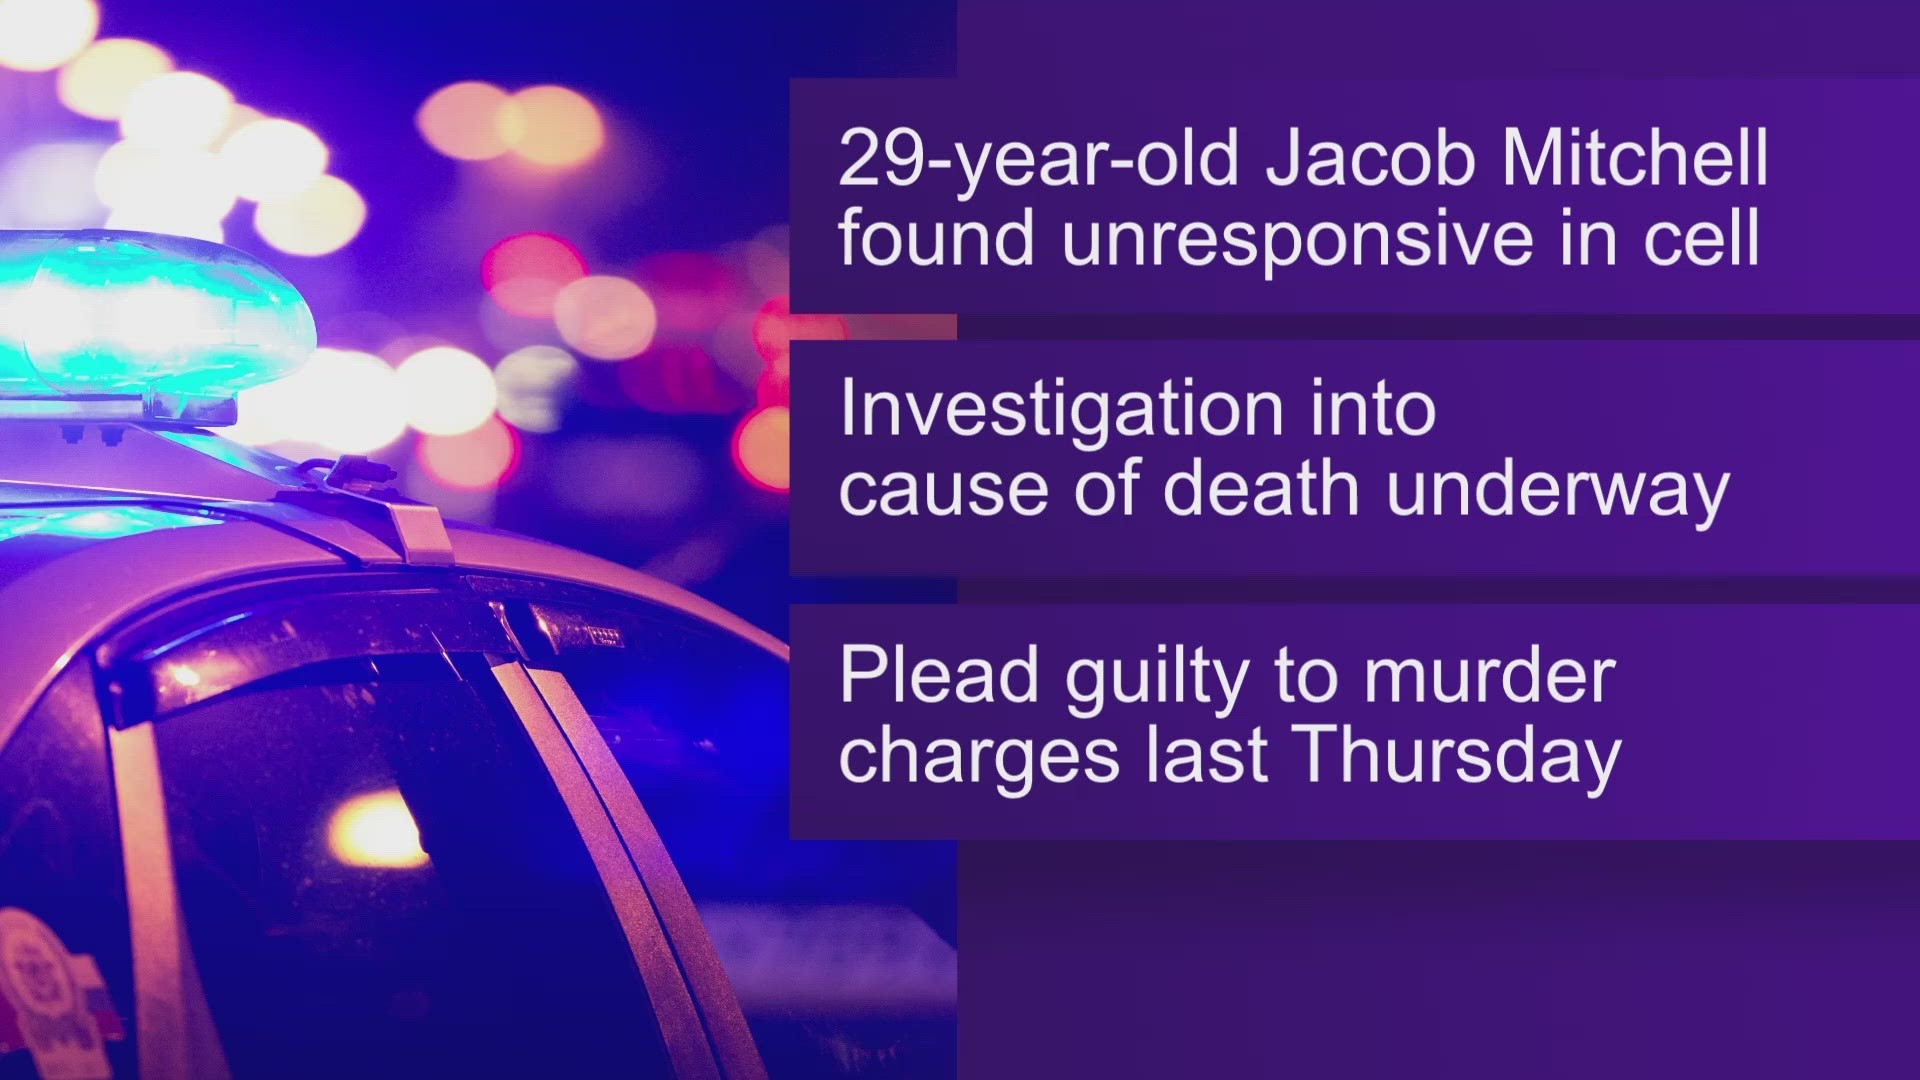 Jacob Mitchell was arrested in 2022 for killing his mother. He pleaded guilty to the charges on March 30, six days before he was found dead in his cell.